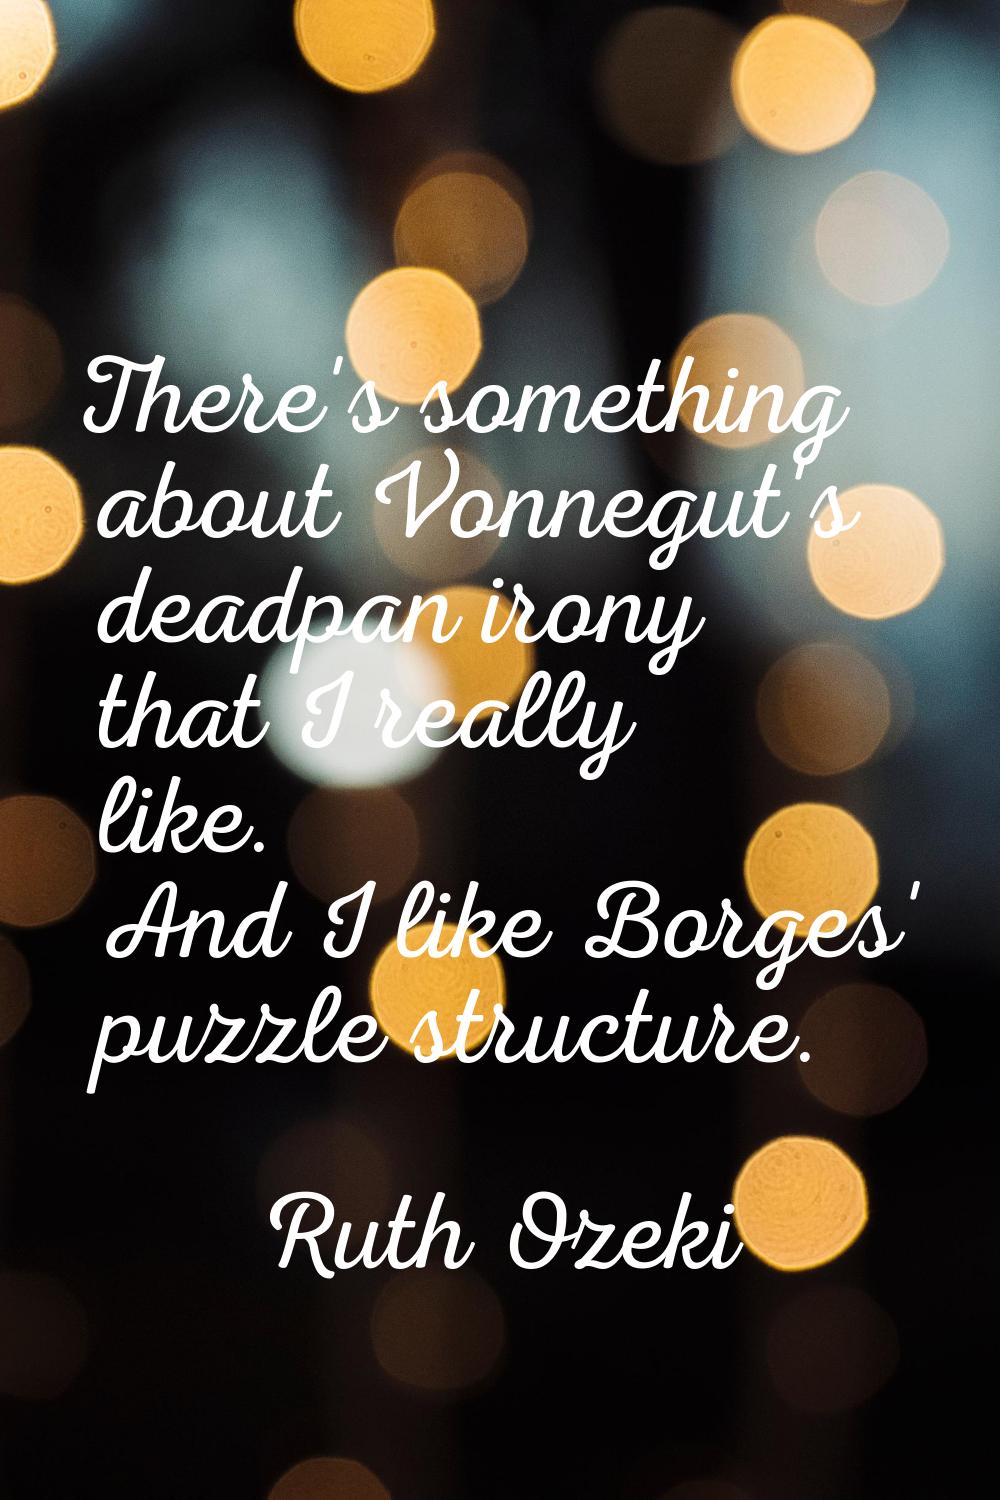 There's something about Vonnegut's deadpan irony that I really like. And I like Borges' puzzle stru